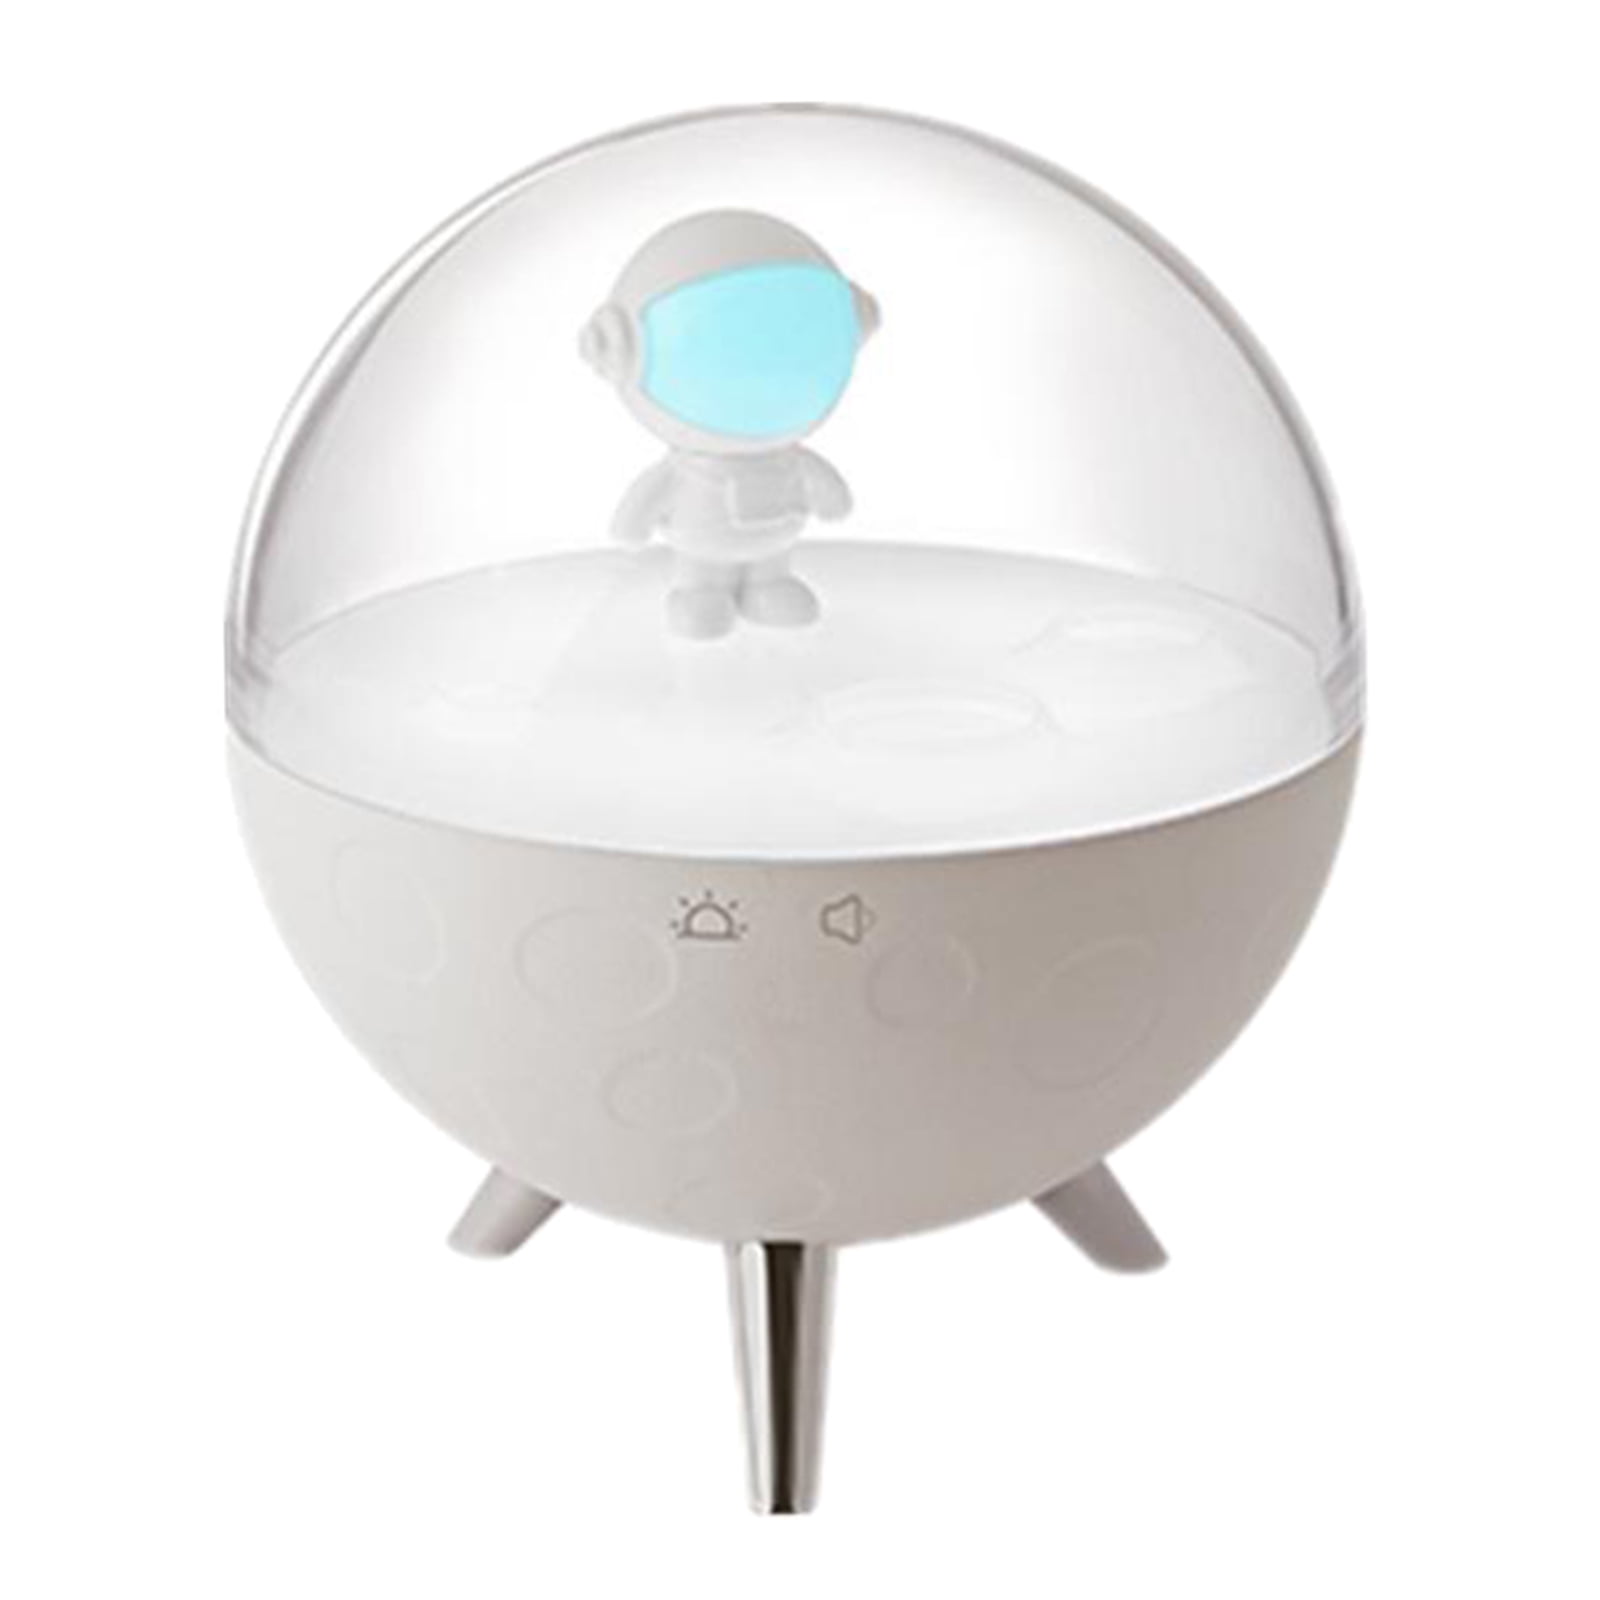 Details about   Spaceman Night Light for Kids Rechargeable Nursery Lamp Baby Bedroom Nightlight